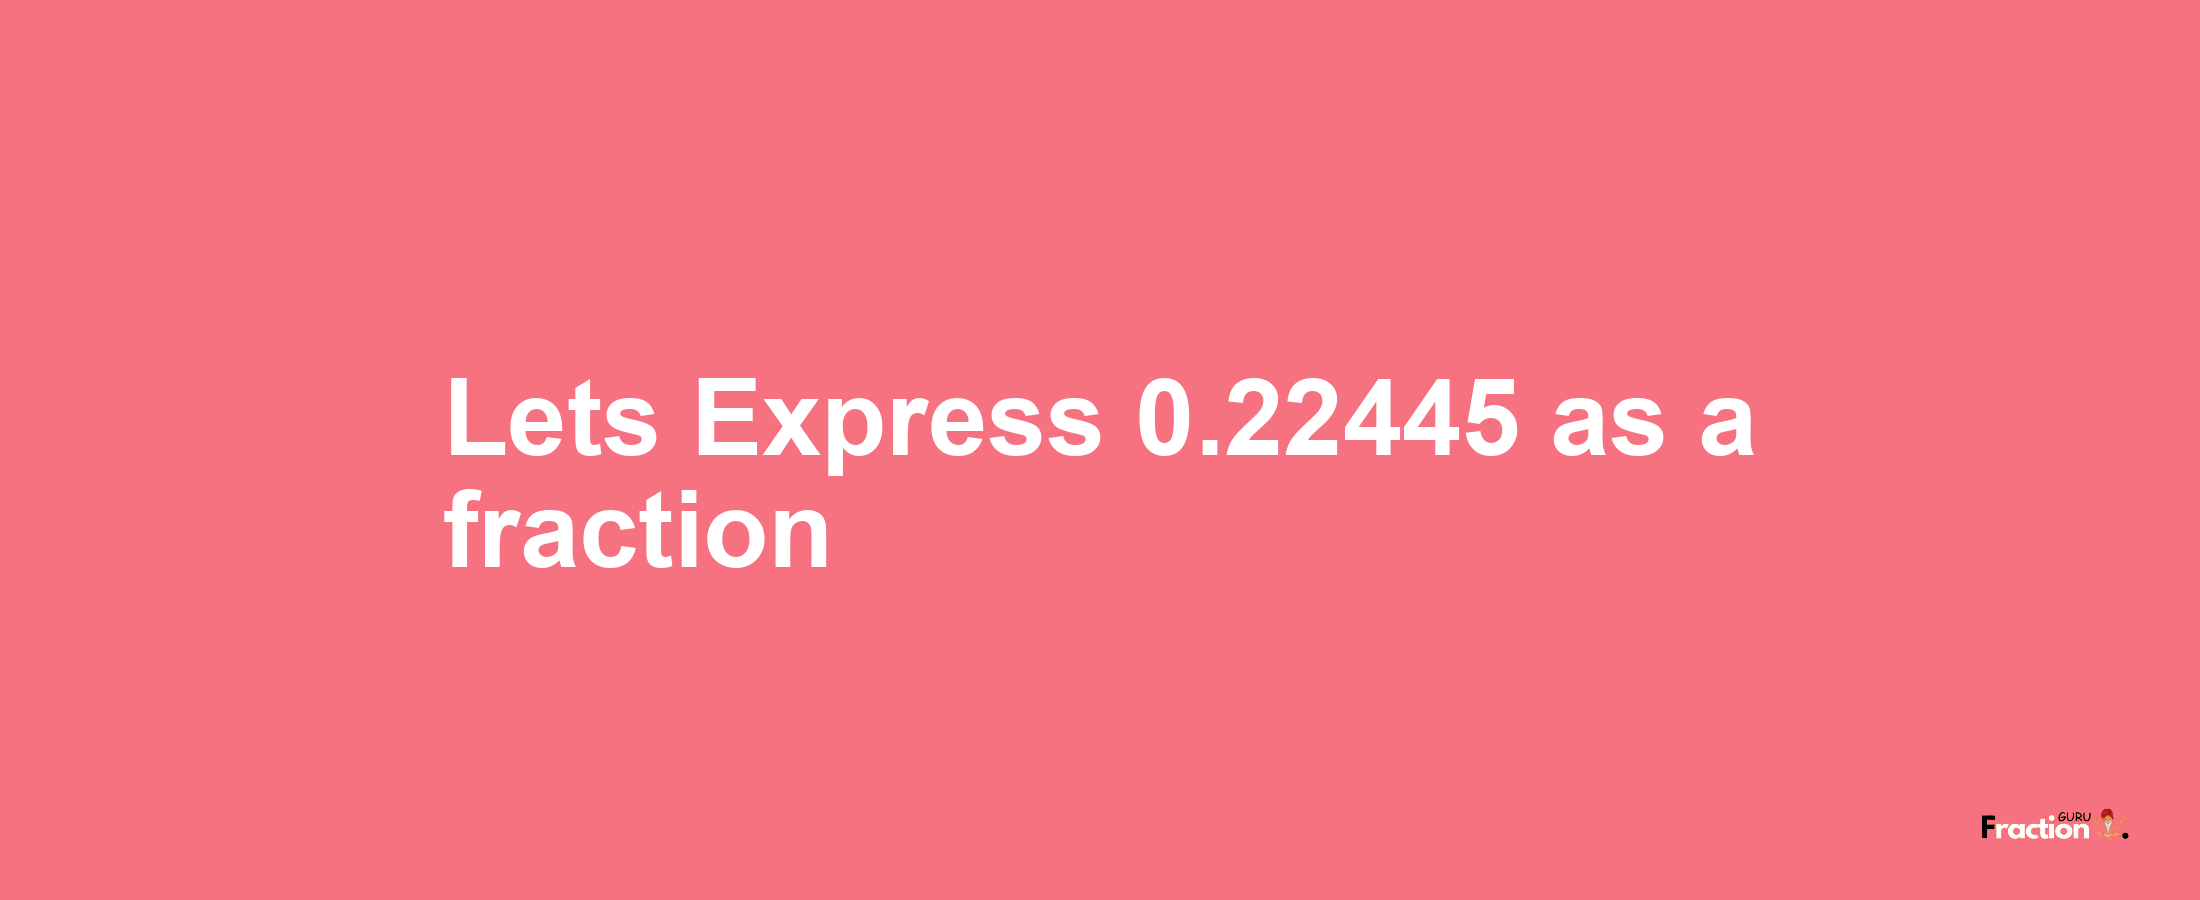 Lets Express 0.22445 as afraction